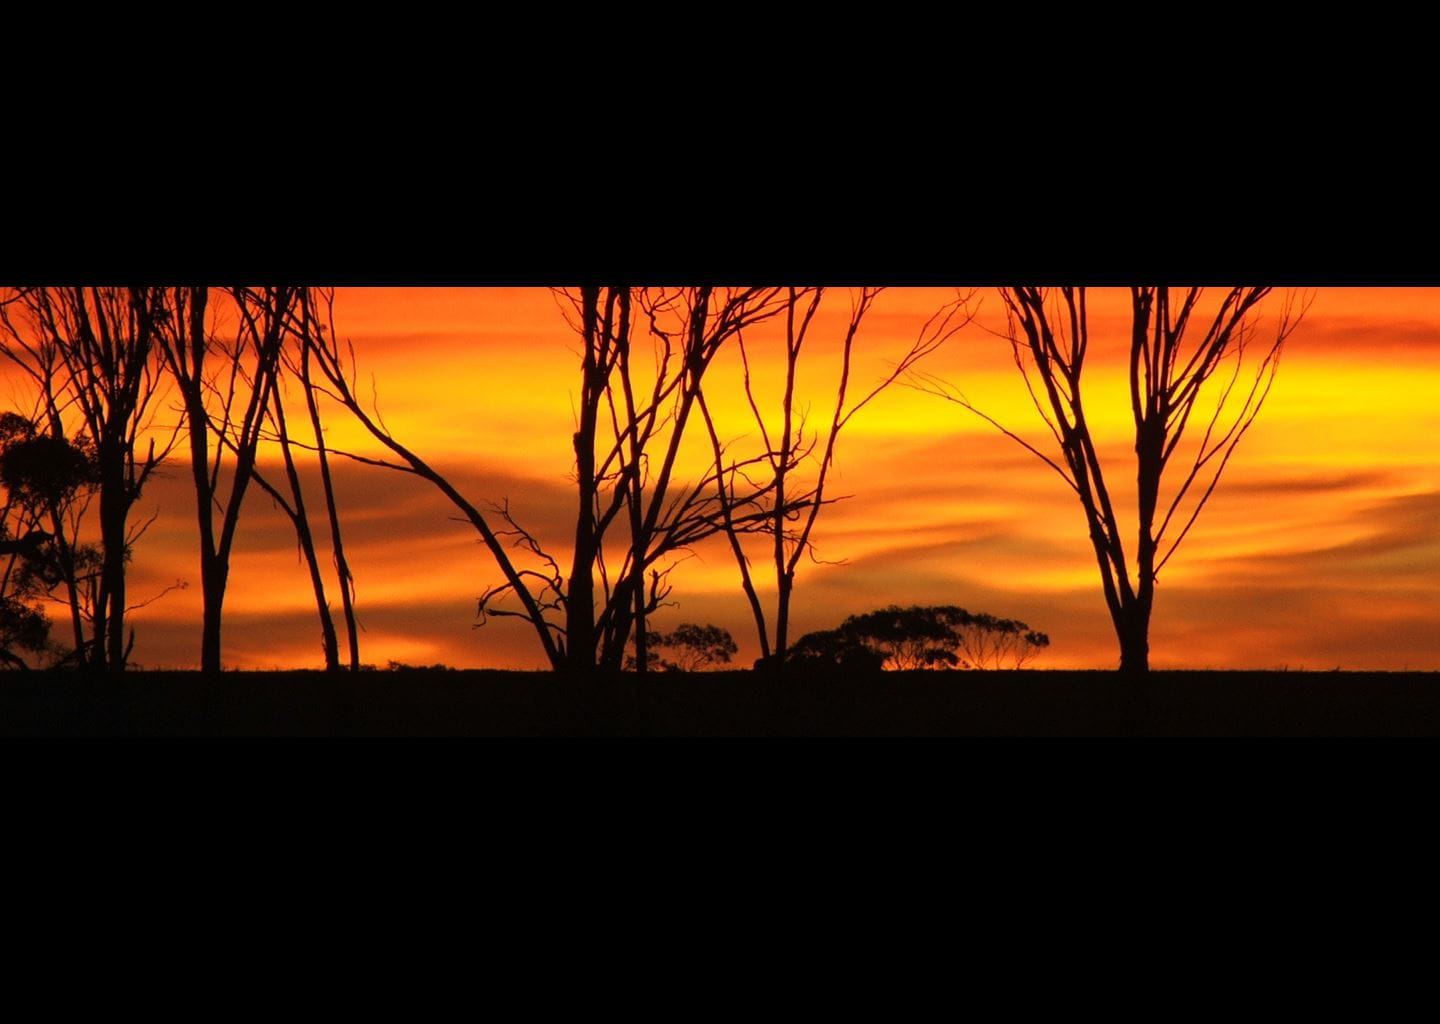 Sunset with silhouette of trees